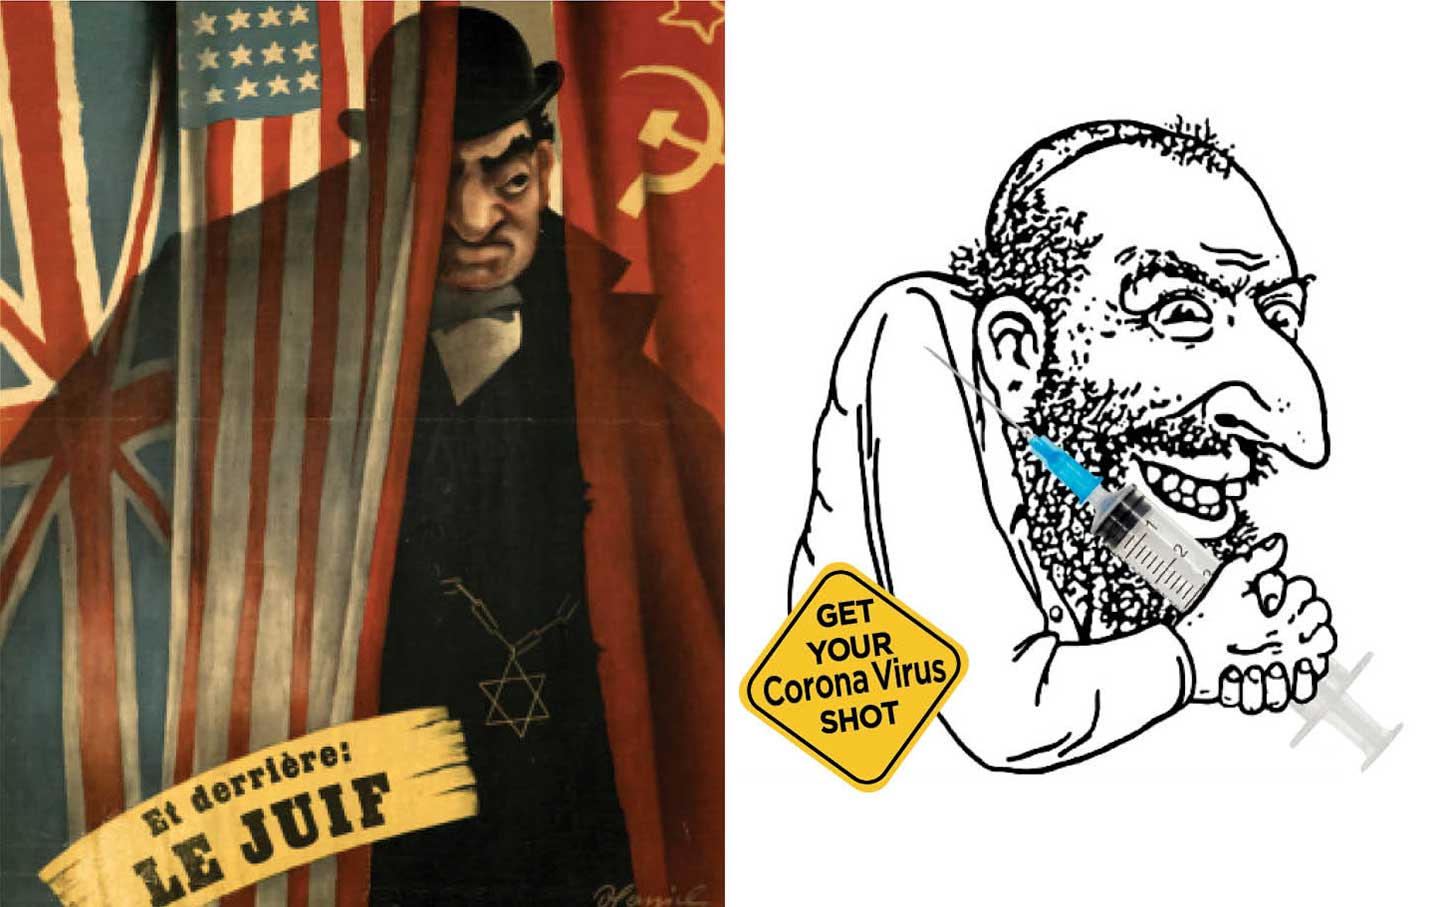 Left: Nazi propaganda poster from the early 1940s depicts Jews as conspiring to provoke a war with Germany. Right: Just as the Nazis recycled medieval antisemitic tropes, this 21st-century update, featured in a “Jerusalem Post” story on vaccine resistance, incorporates the visual vocabulary of the Nazi era.